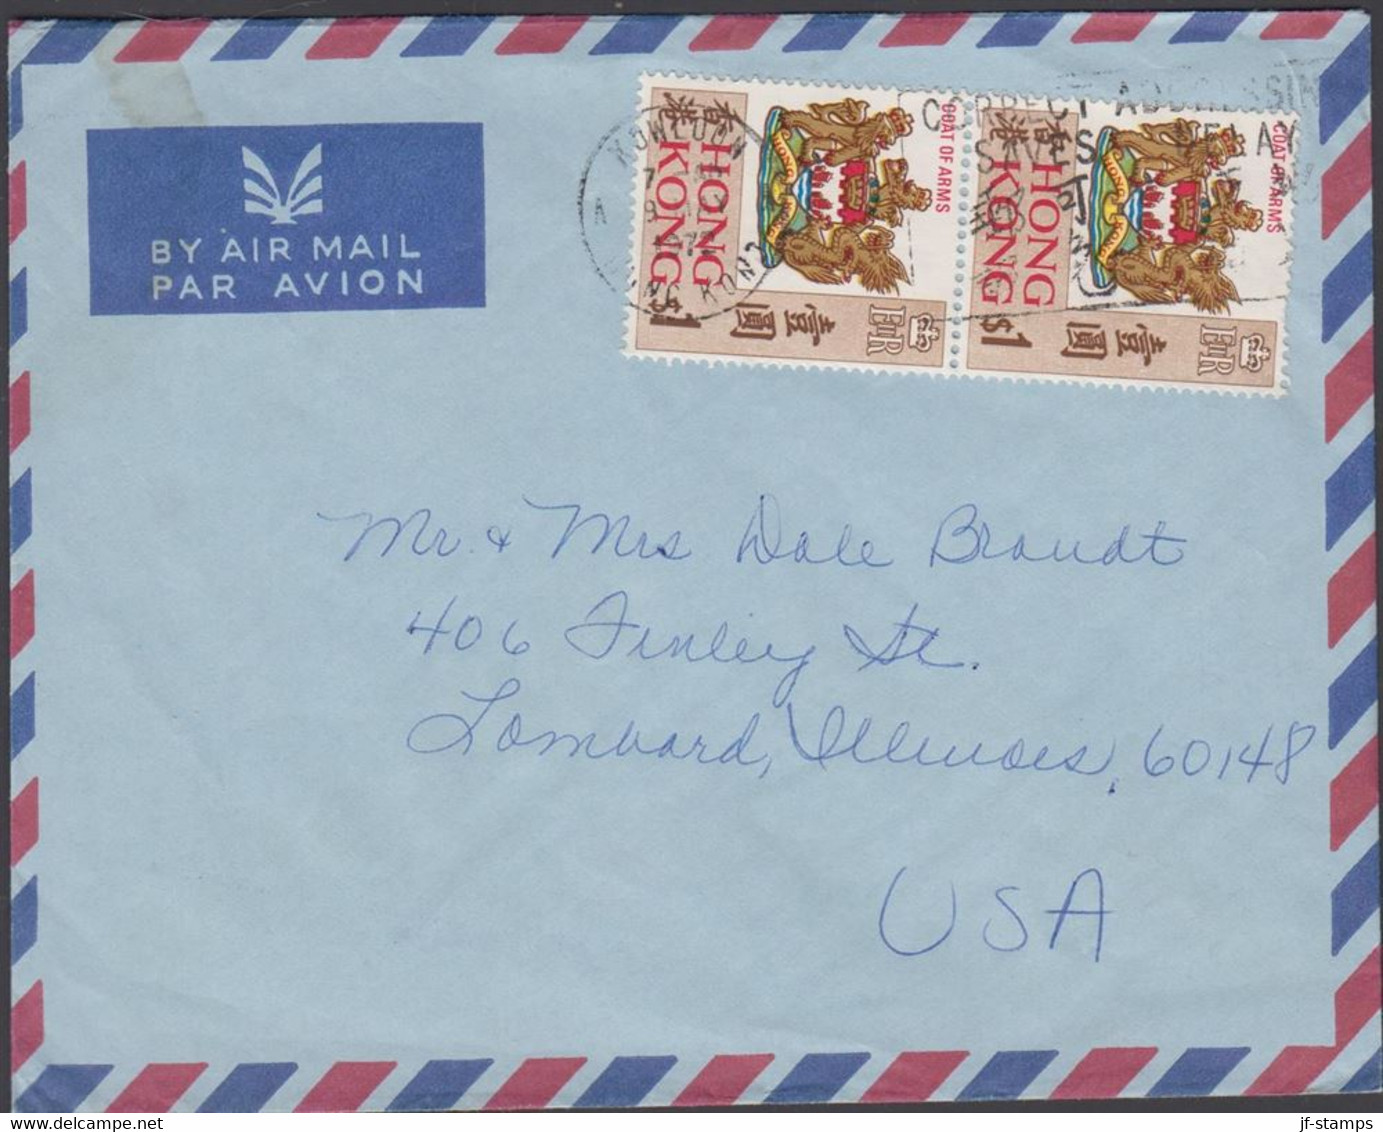 1972. HONG KONG 2 Ex COAT OF ARMS $ 1. On AIR MAIL Cover To USA From HONG KONG 9 MAY 1972.  (Michel 239) - JF427098 - Covers & Documents